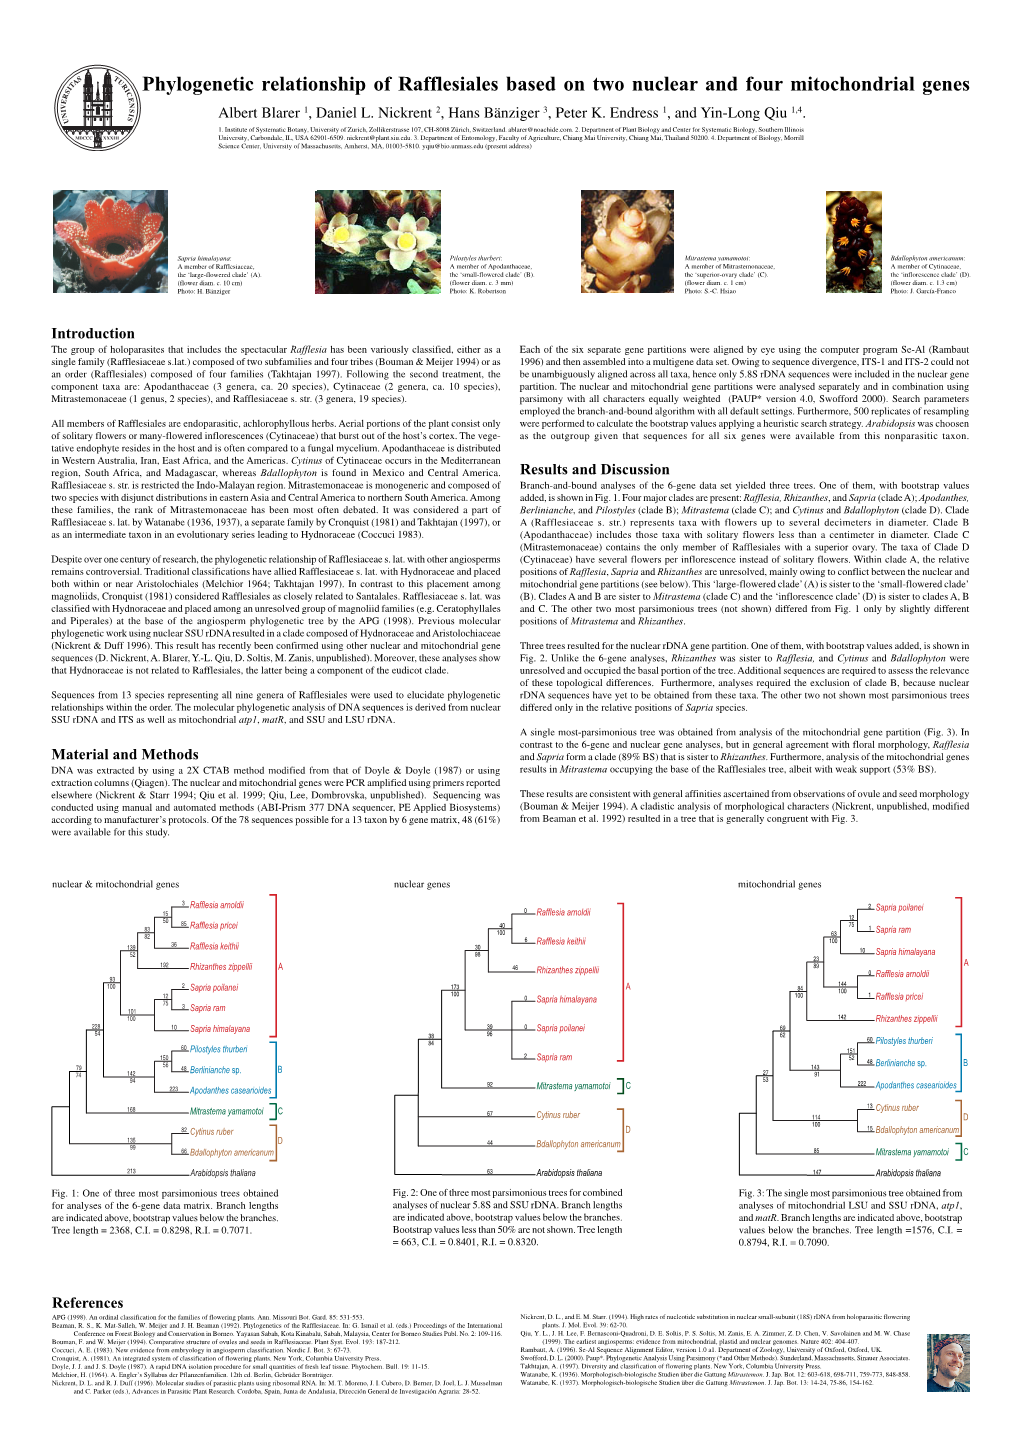 Phylogenetic Relationship of Rafflesiales Based on Two Nuclear and Four Mitochondrial Genes Albert Blarer 1, Daniel L